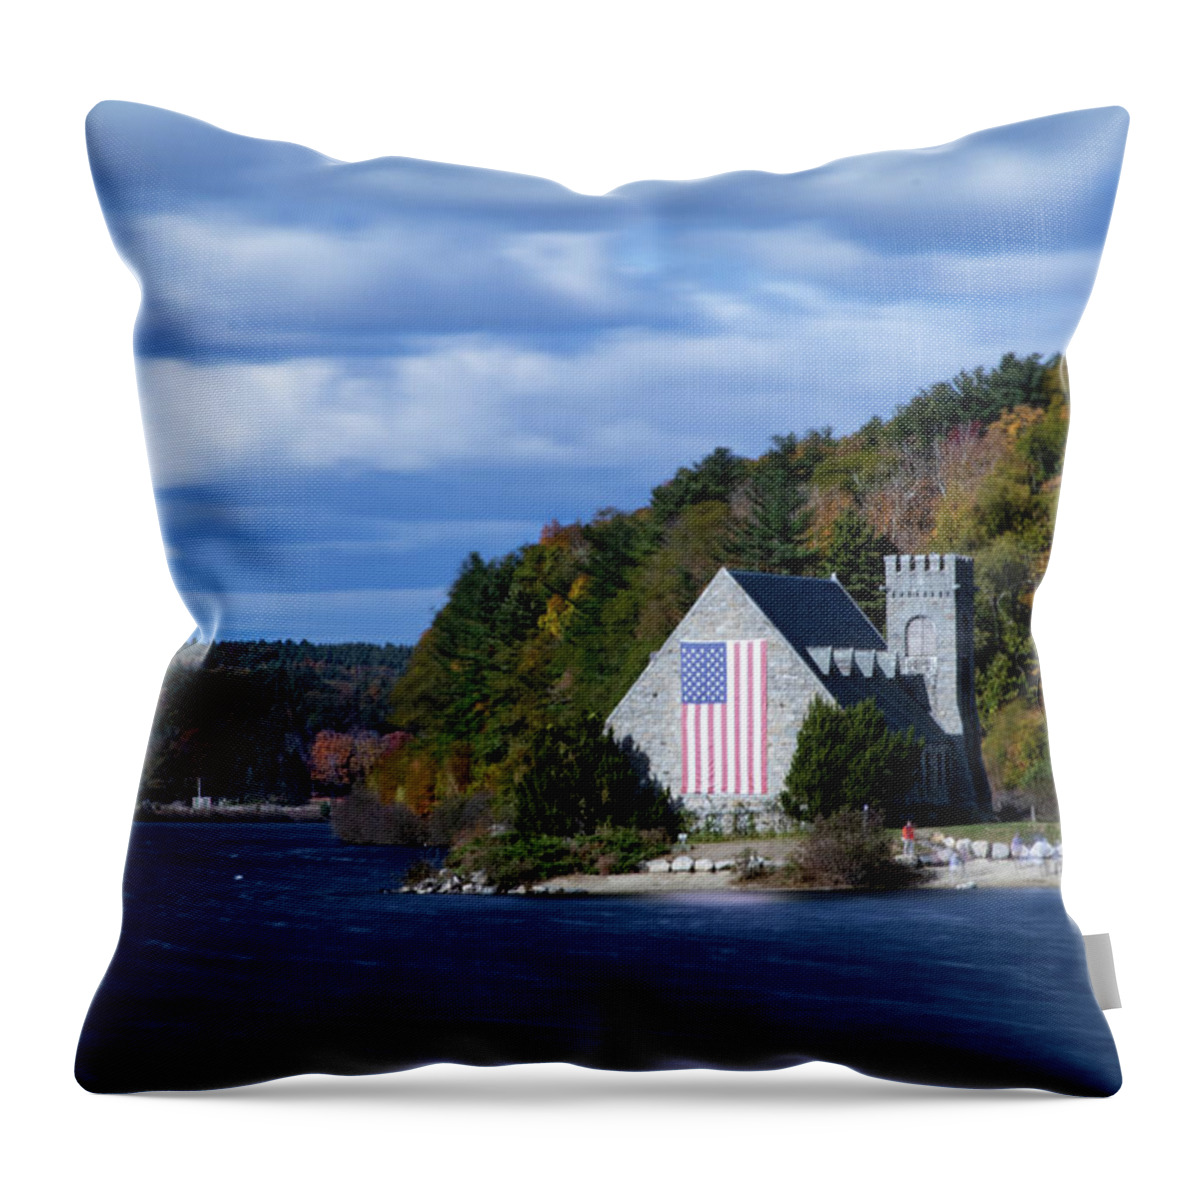 Old Stone Church Throw Pillow featuring the photograph Old Stone Church in West Boylston by Jeff Folger